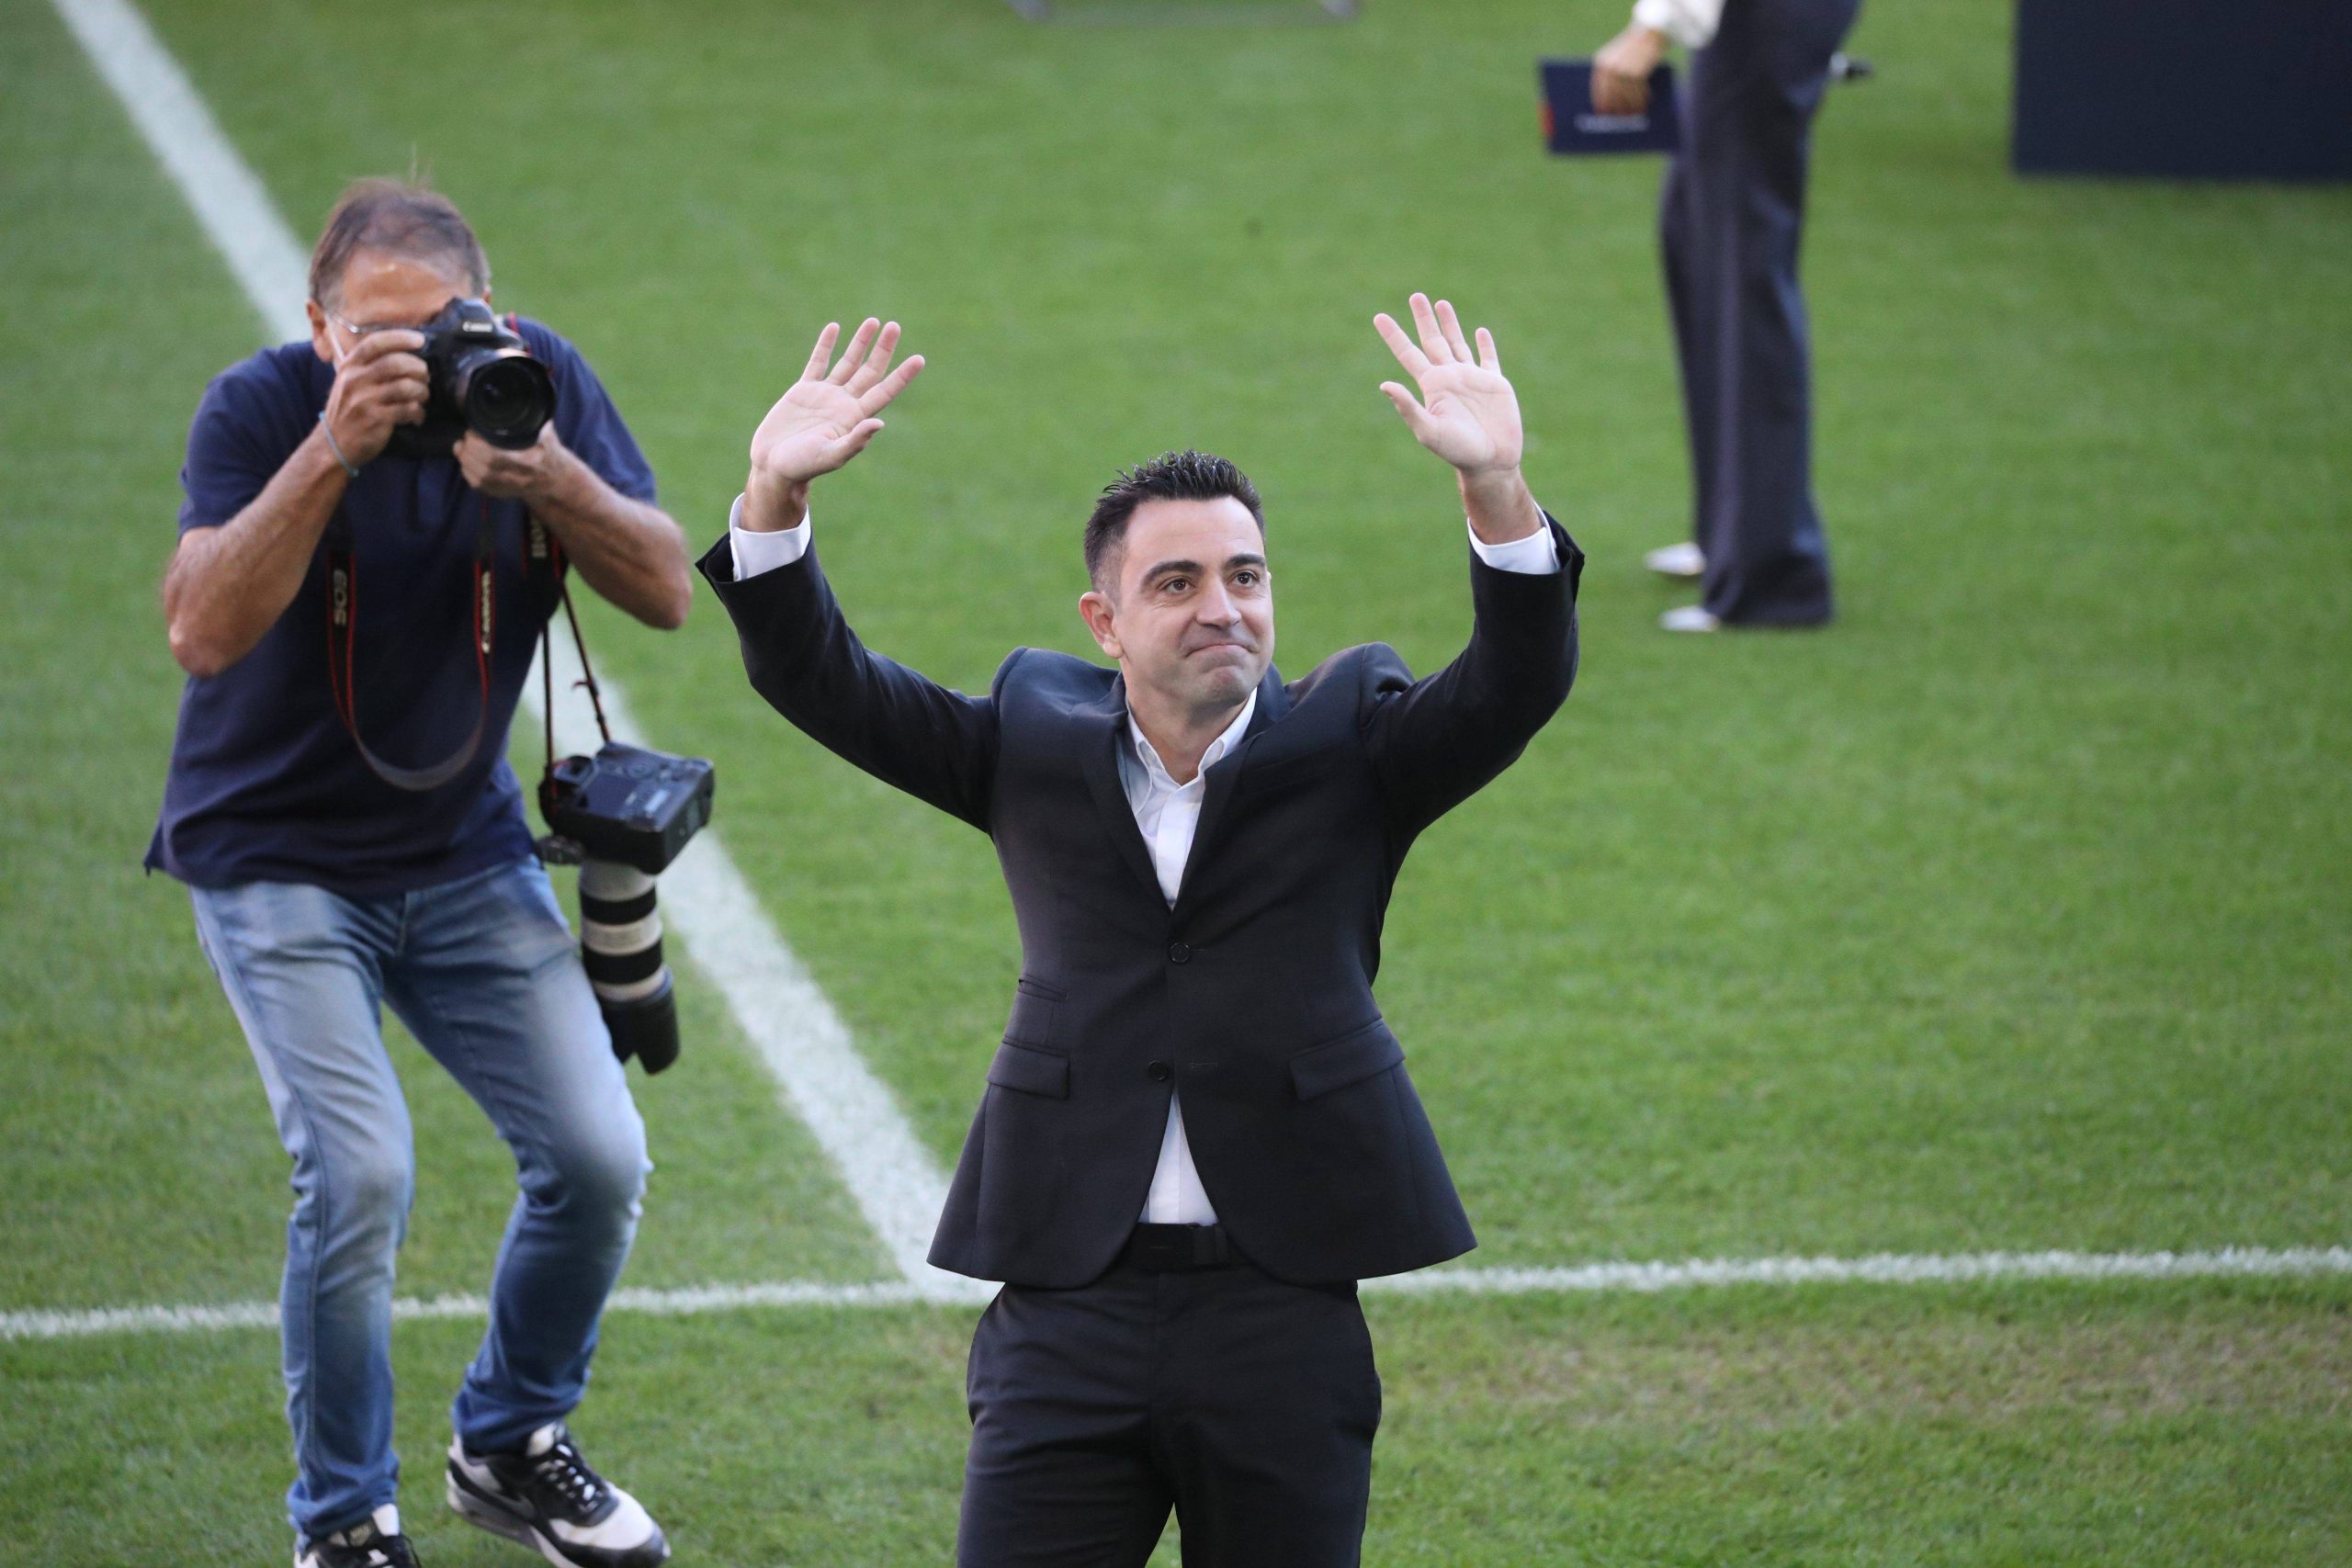 Xavi introduced as new Barcelona coach to over 9,000 fans at the Nou Camp in Spain